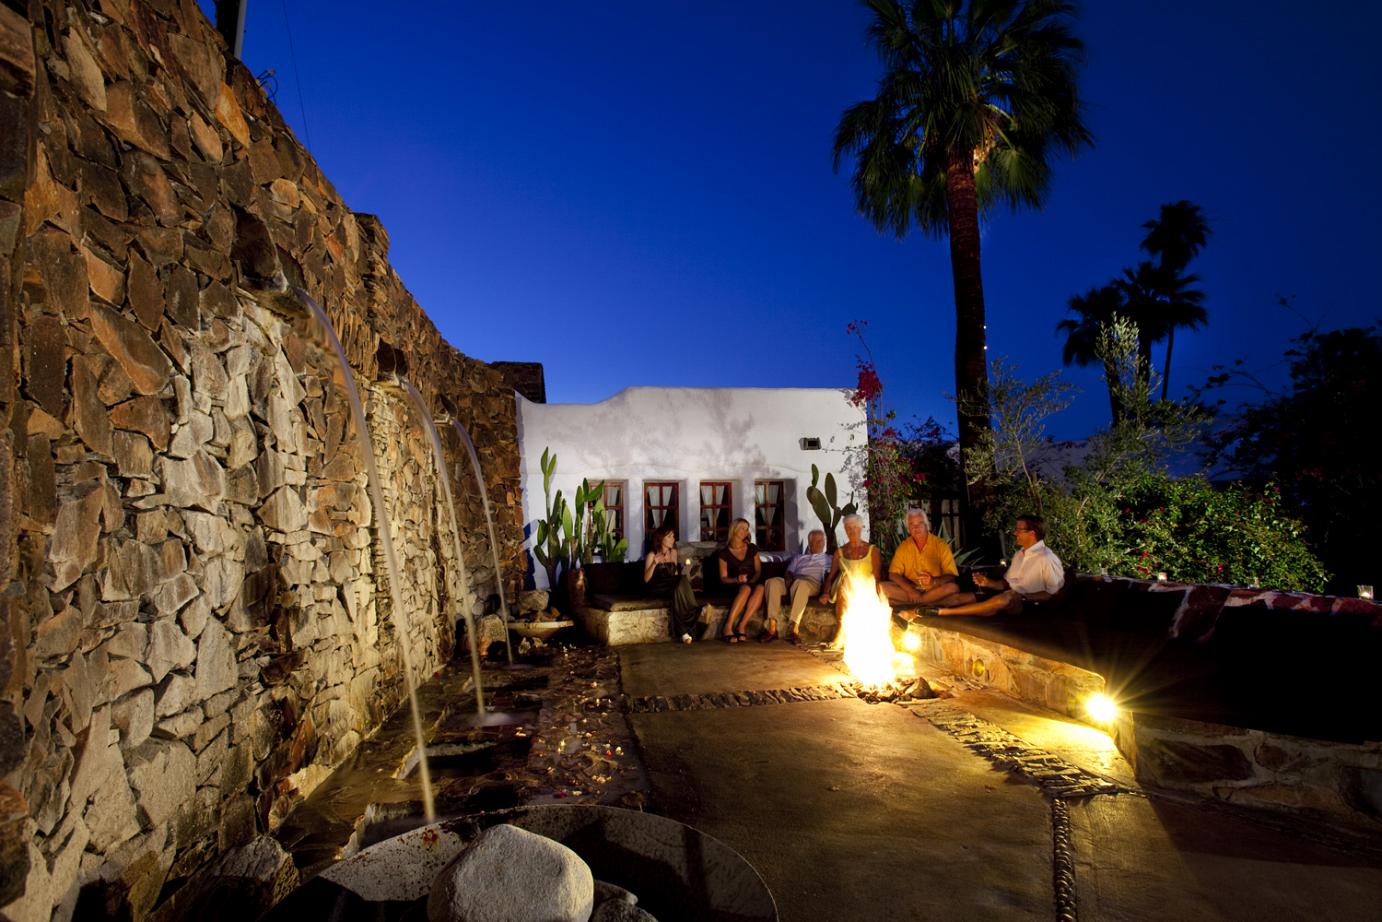 How about a stay at a fine boutique hotel? Here a crackling bonfire beats the nightly desert chill.